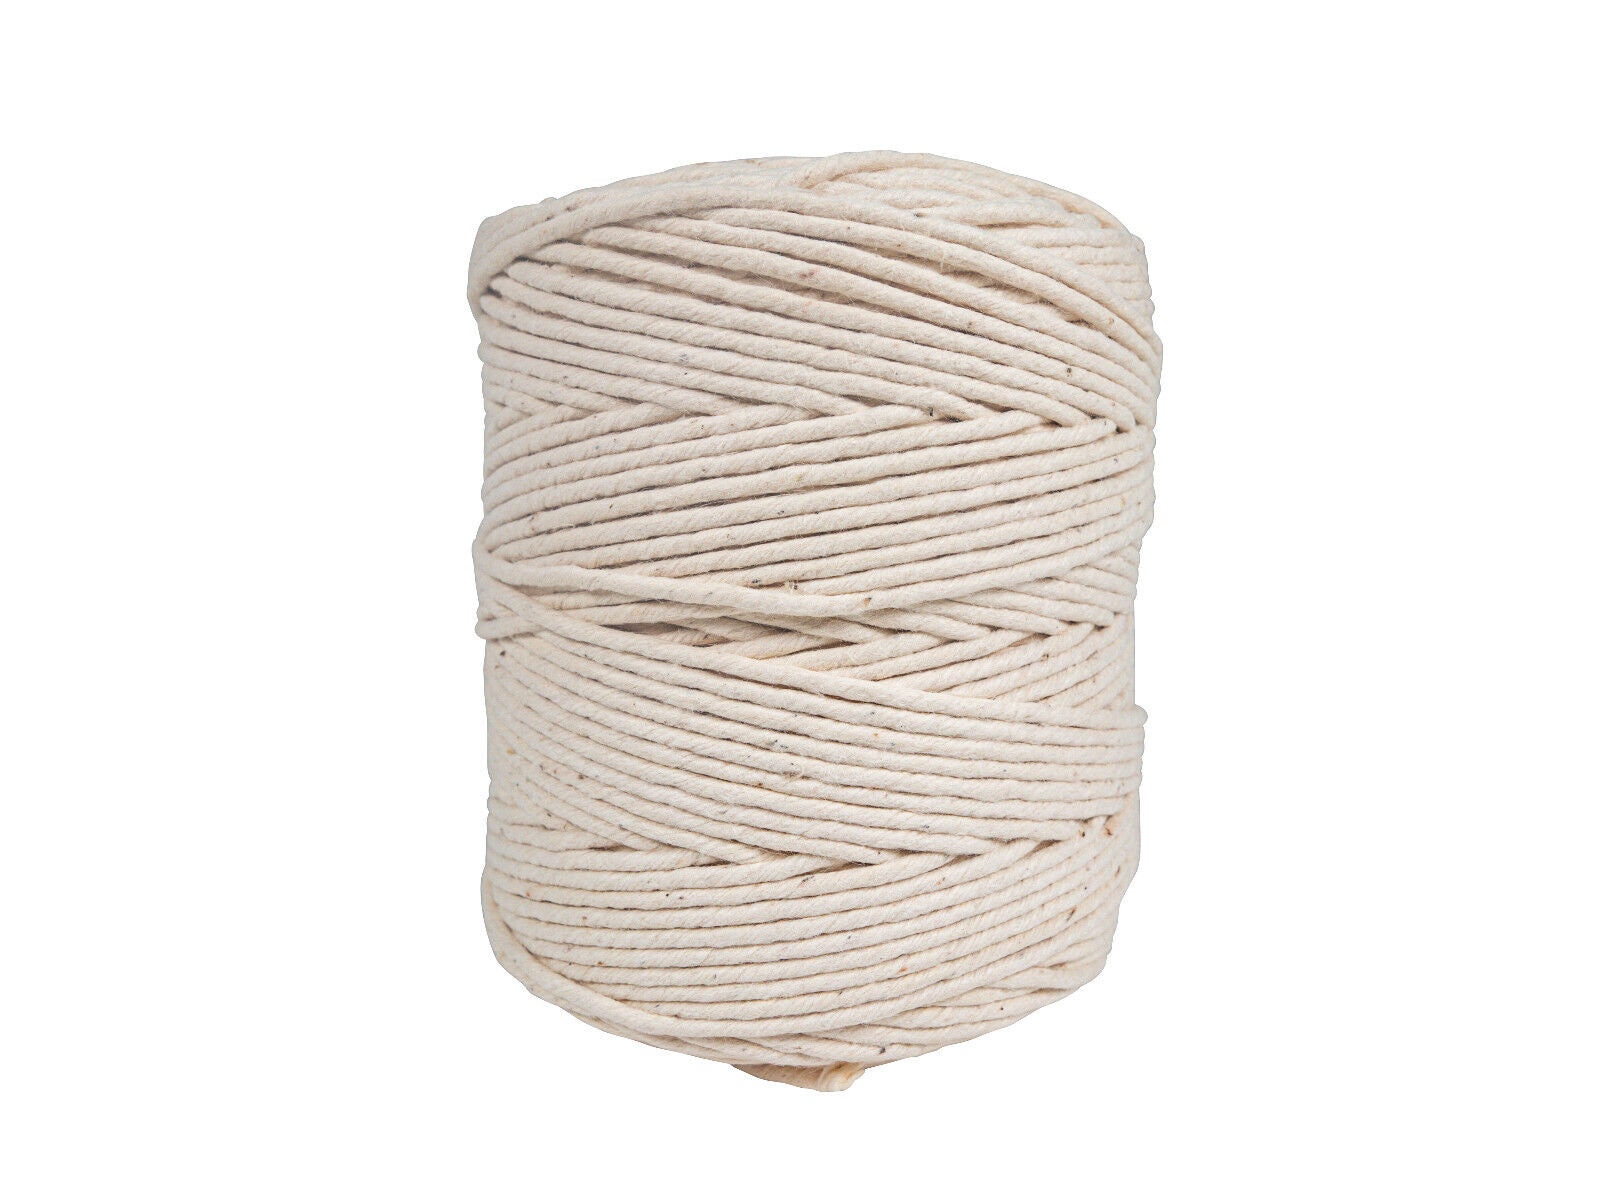 Essential Kitchen Tool Thick Cotton Twine for Trussing and Cooking Prep